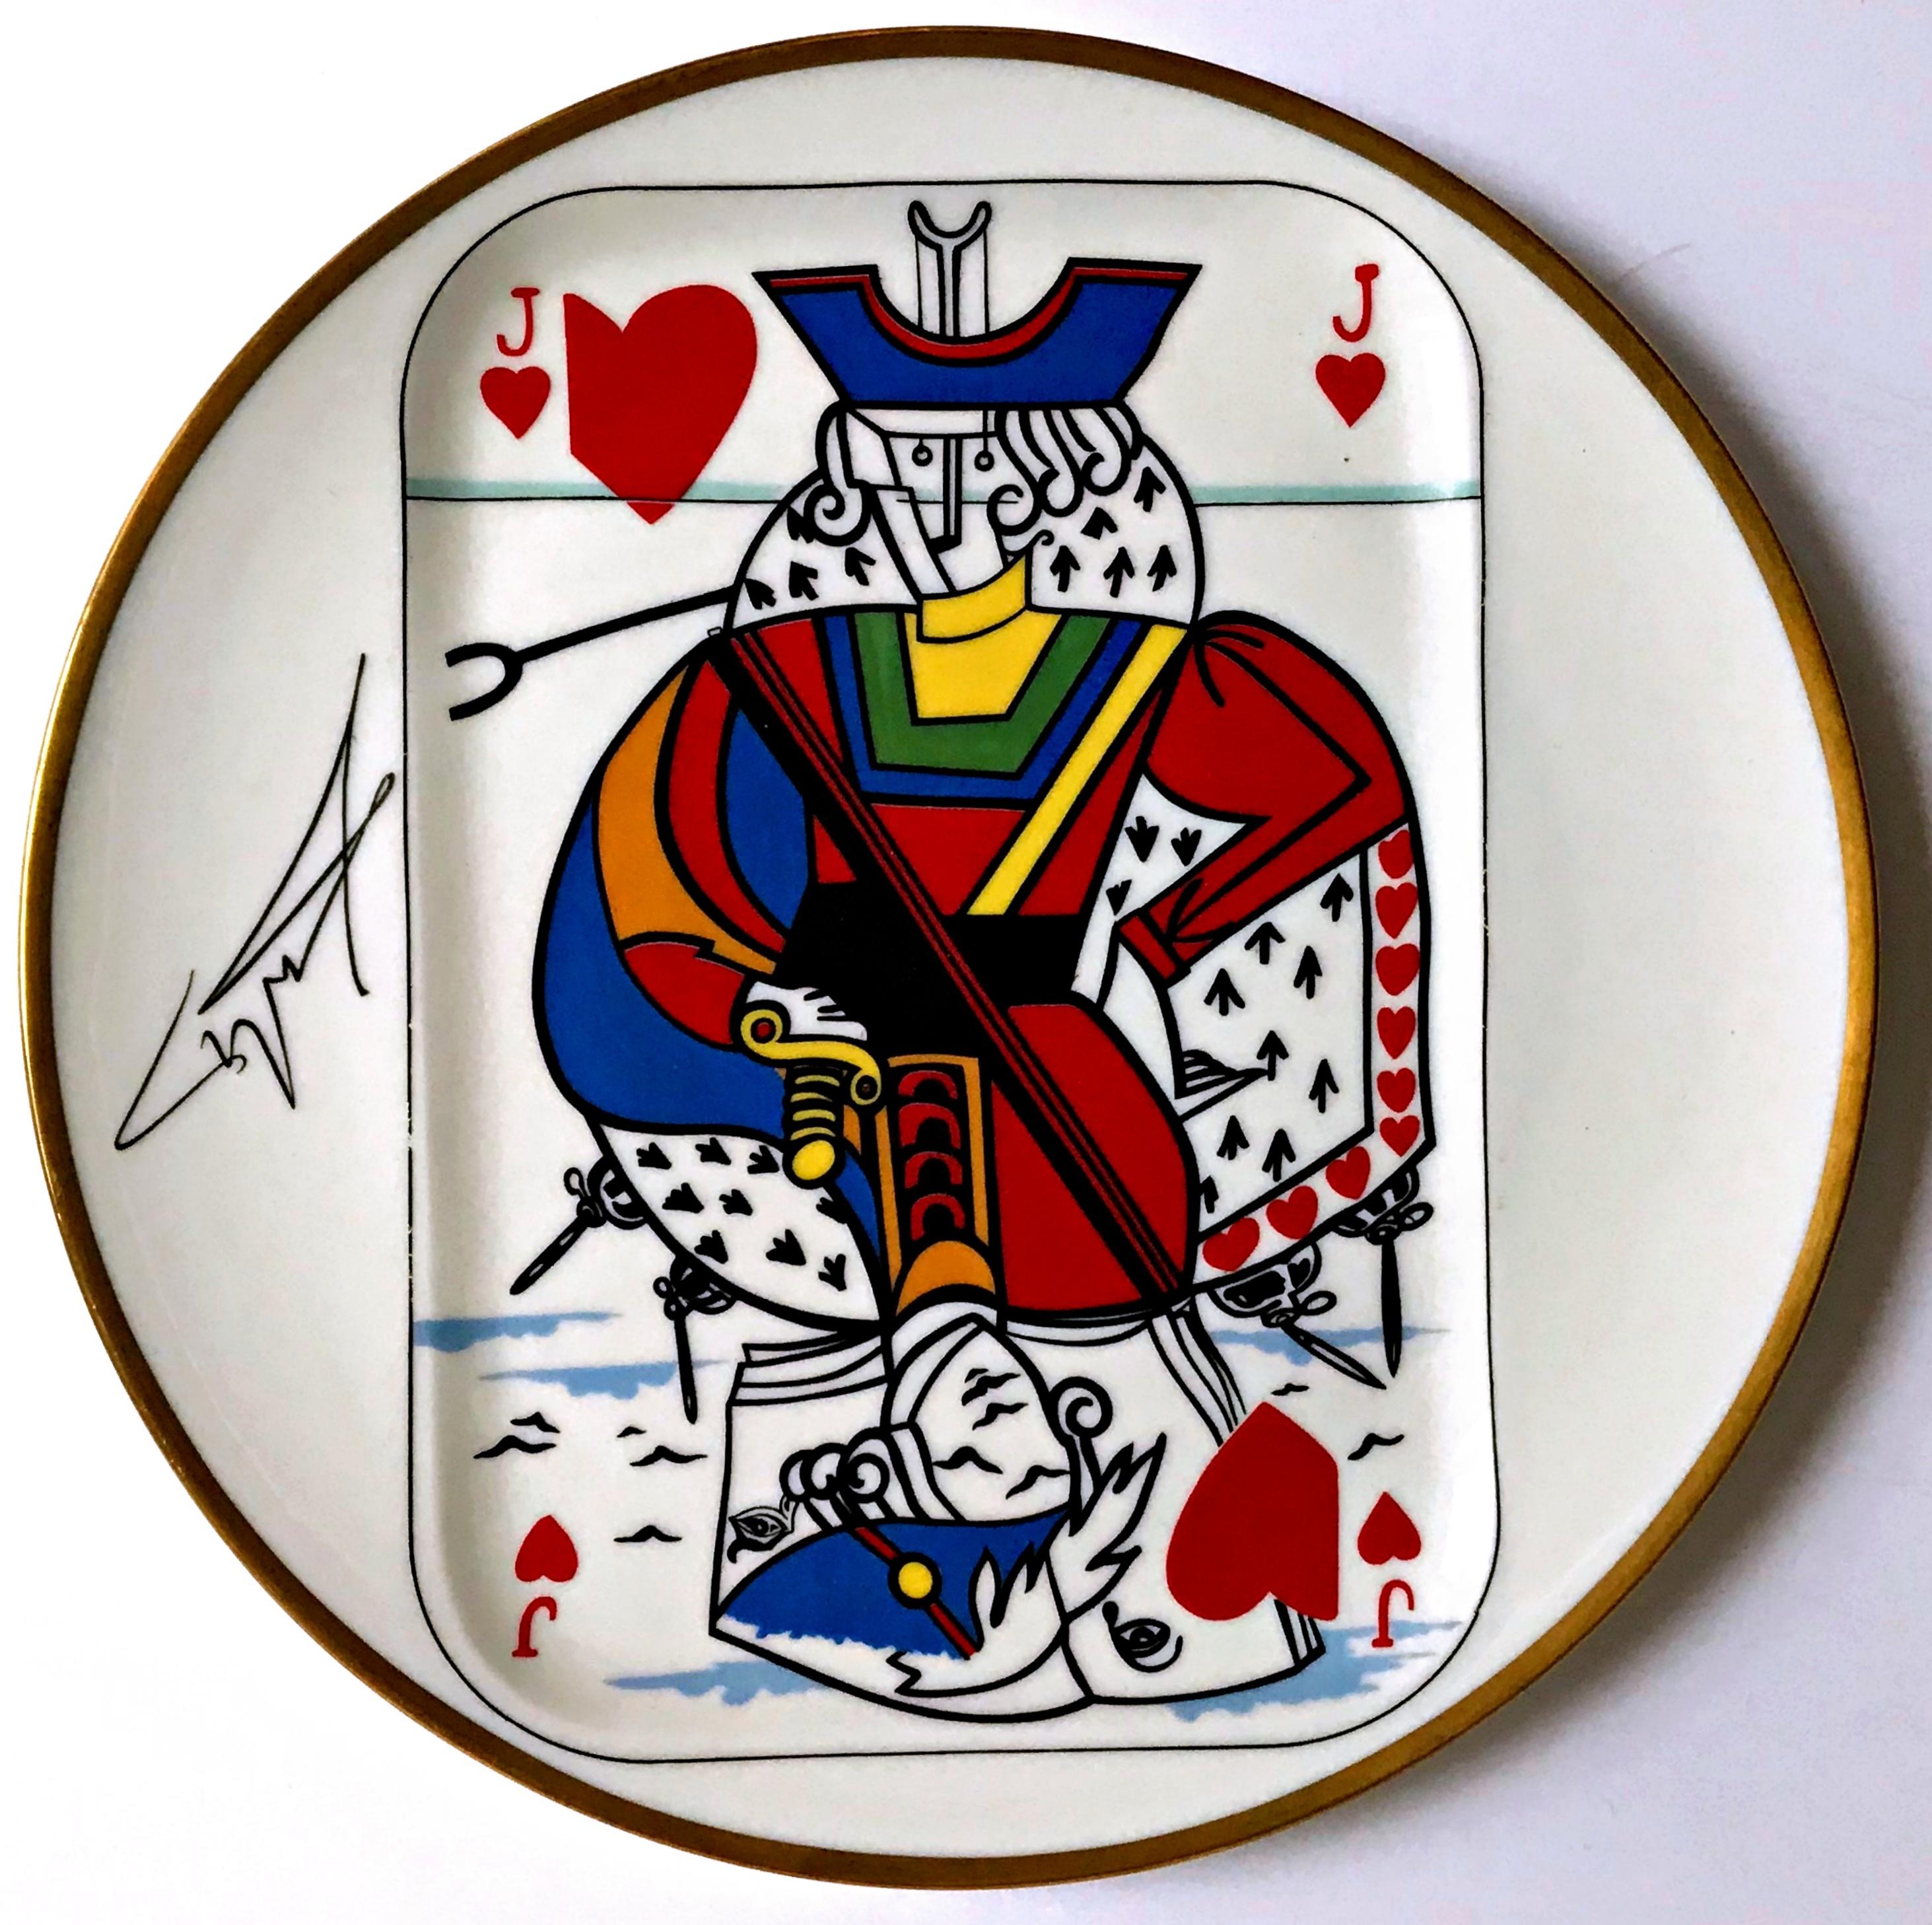 Jack of Hearts - limited edition porcelain plate made in France  - Mixed Media Art by Salvador Dalí